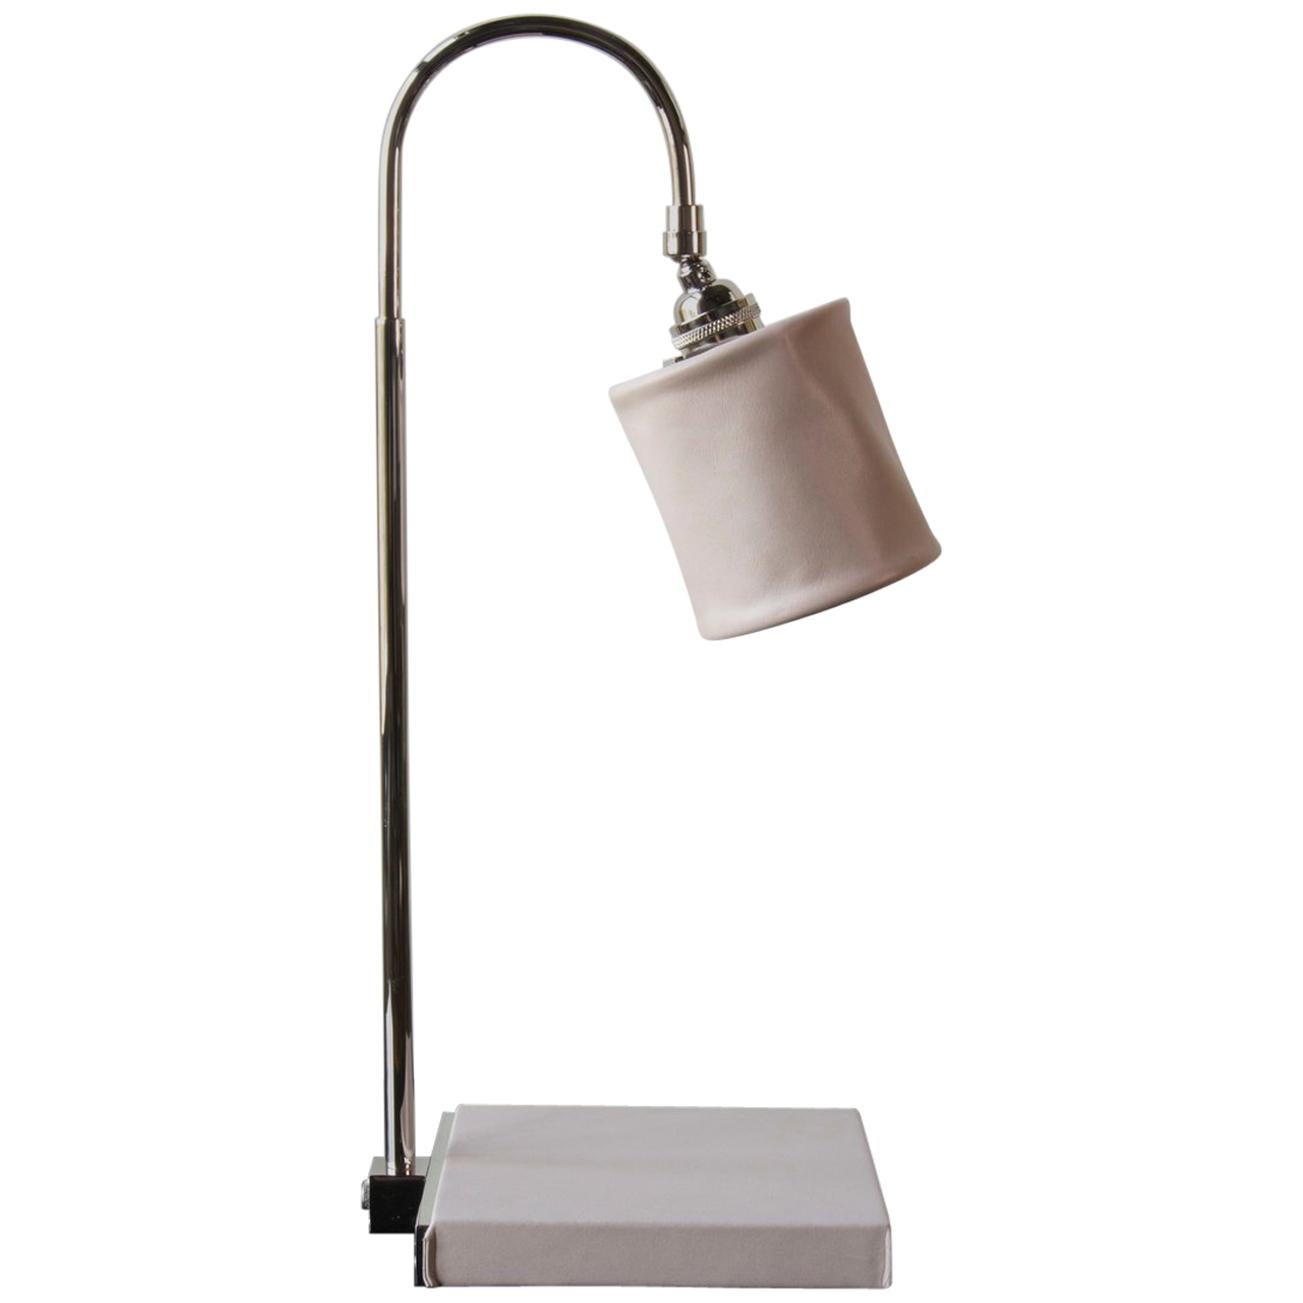 Series01 Desk Lamp, Hand-Dyed Blush 'Pink' Leather, Polished Nickel-Plated Brass For Sale